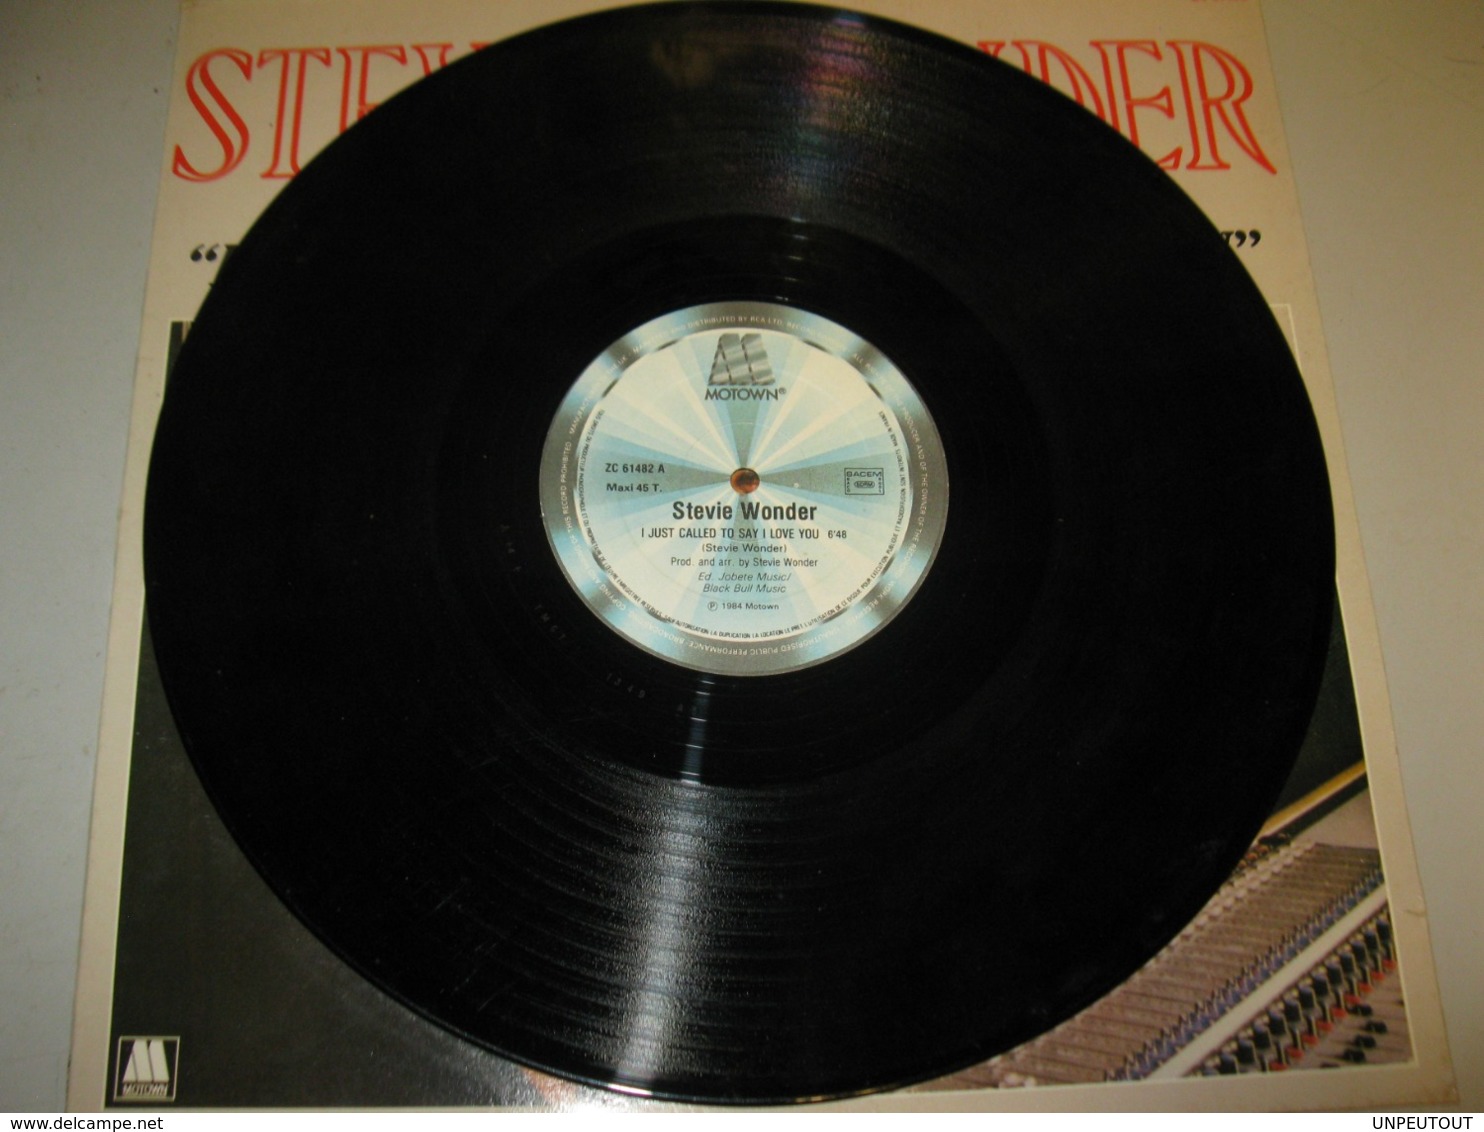 STEVIE WONDER "I JUST CALLED TO SAY I LOVE YOU" MAXI 45 T MOTOWN / RCA (1984) - 45 Rpm - Maxi-Single